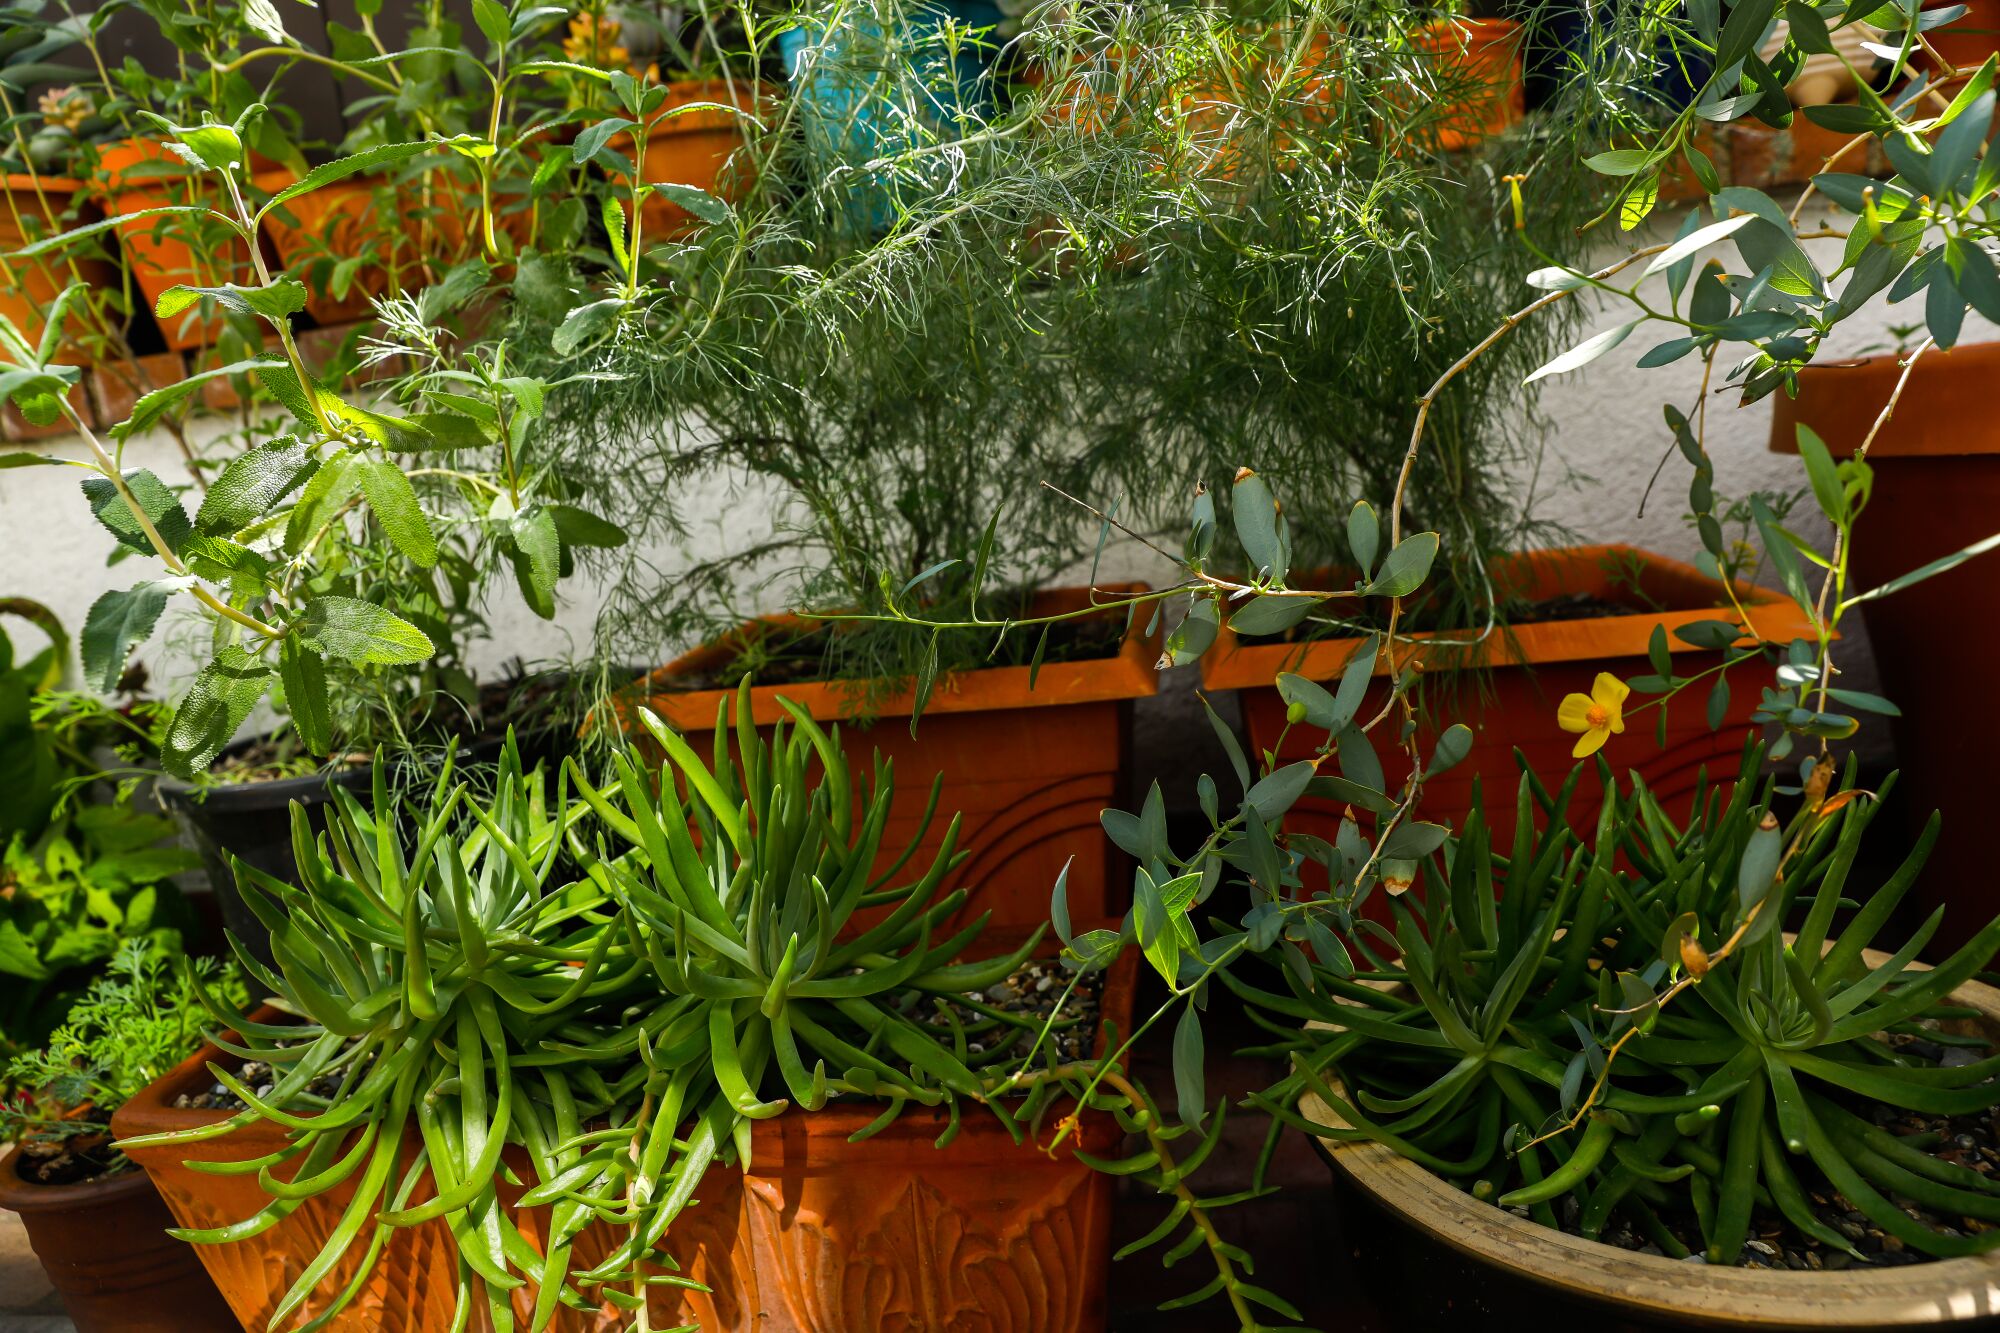 Barbara Chung's patio is lined with stacked rows of plants in pots.